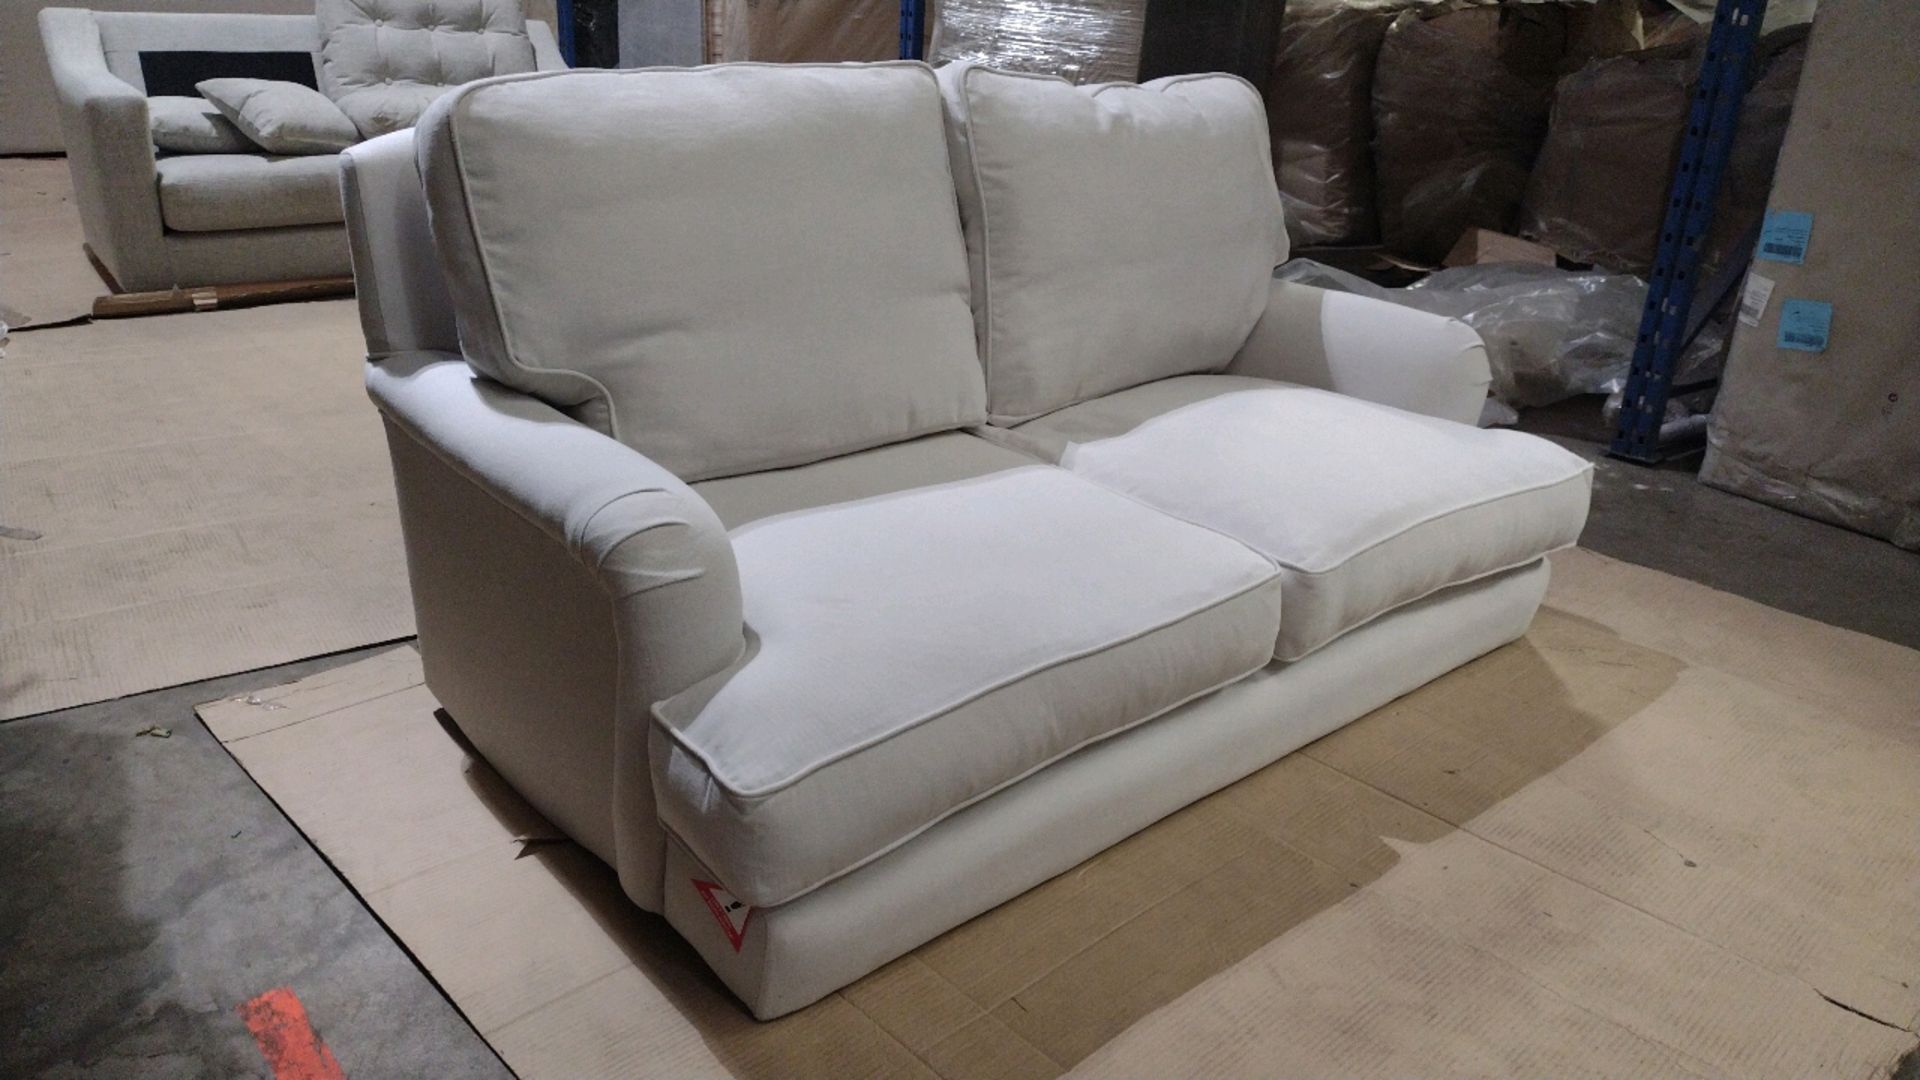 Bluebell 2 Seat Sofa - Image 3 of 6